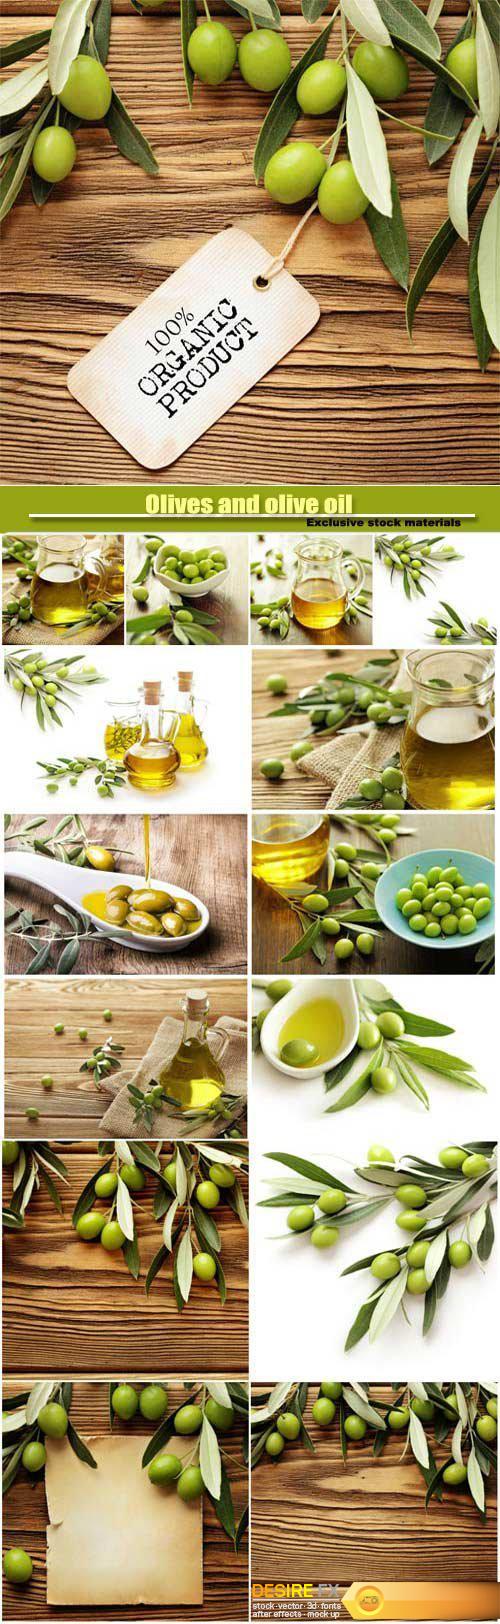 Olives and olive oil on a wooden background